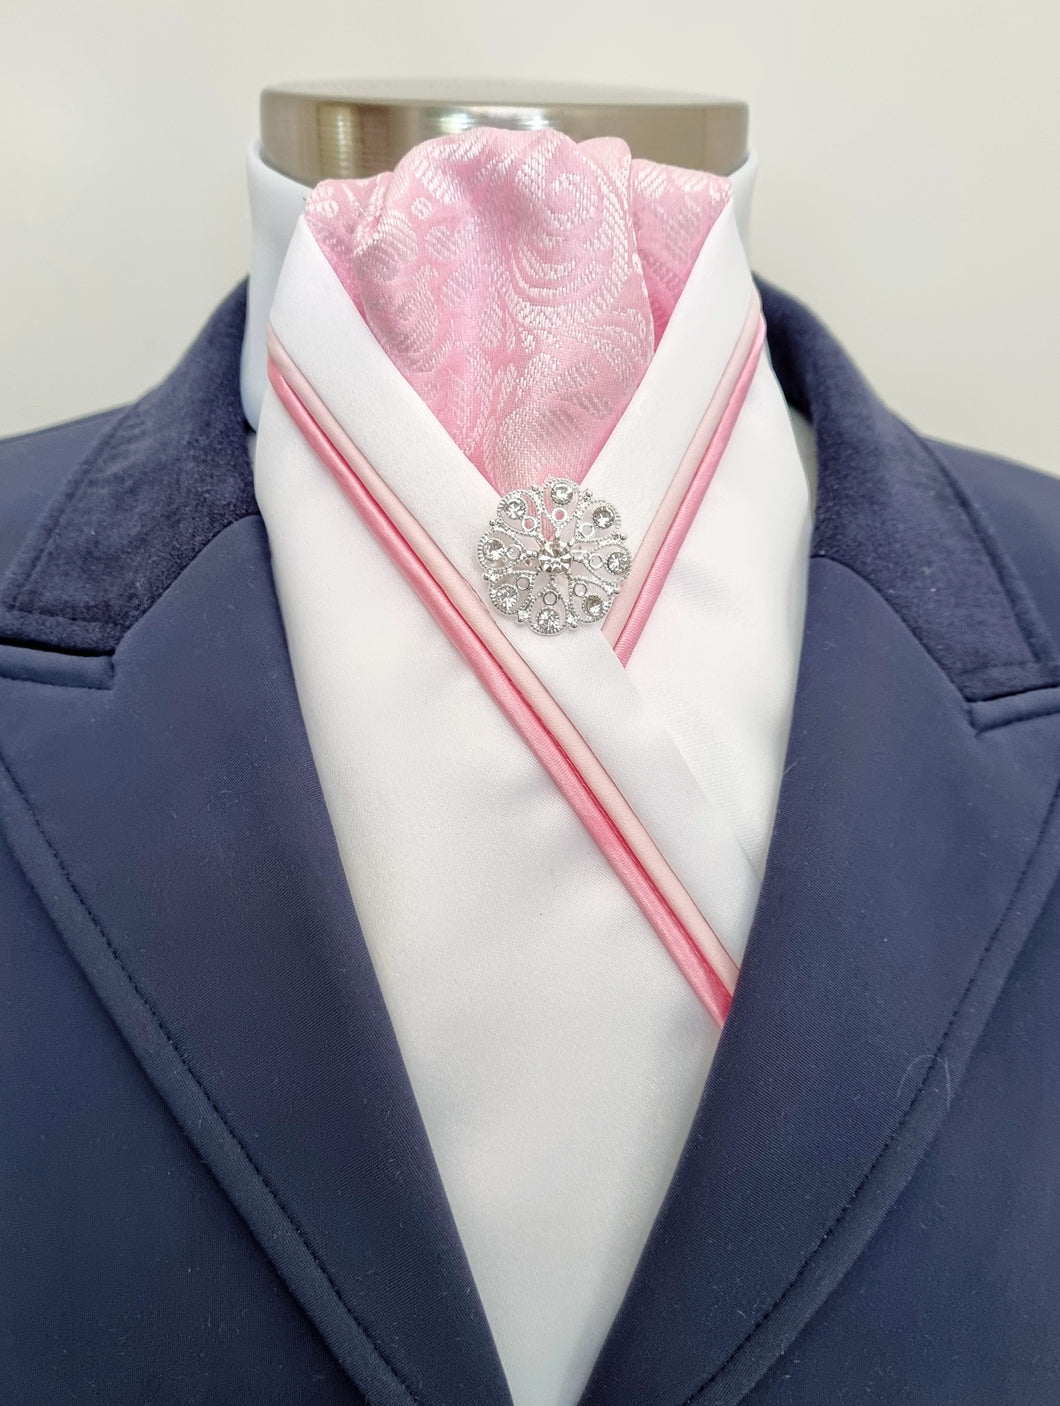 ERA RACHAEL STOCK TIE - White satin with pink jacquard, 2 x pink piping and  silver brooch